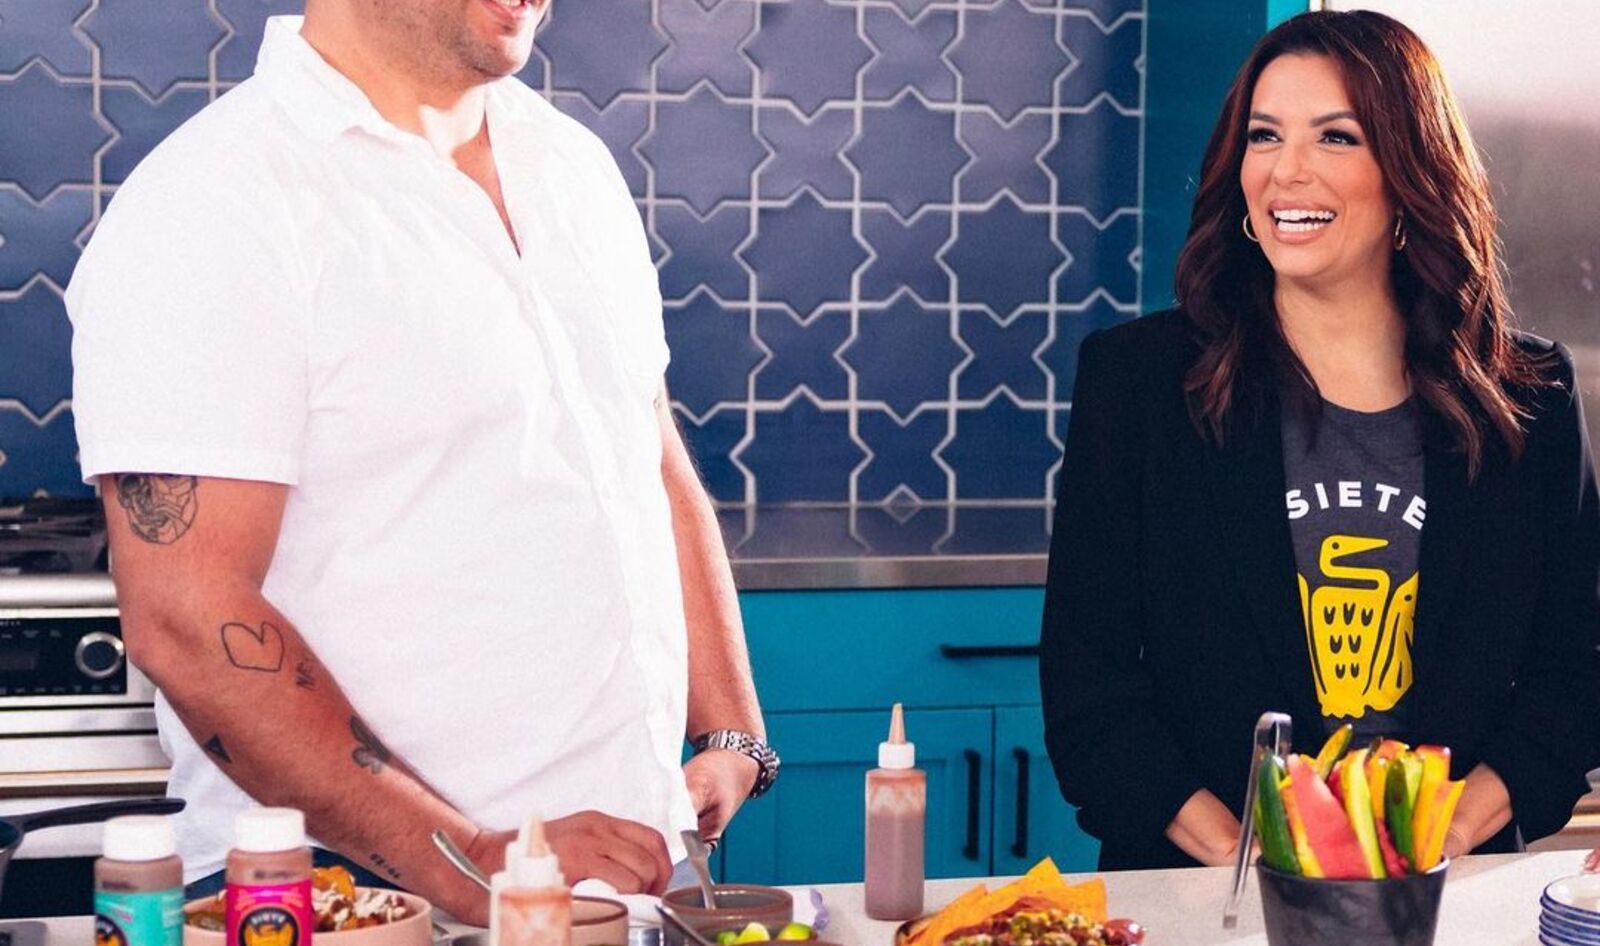 What Is Siete Foods? Meet the Snack Brand Now Backed By Eva Longoria